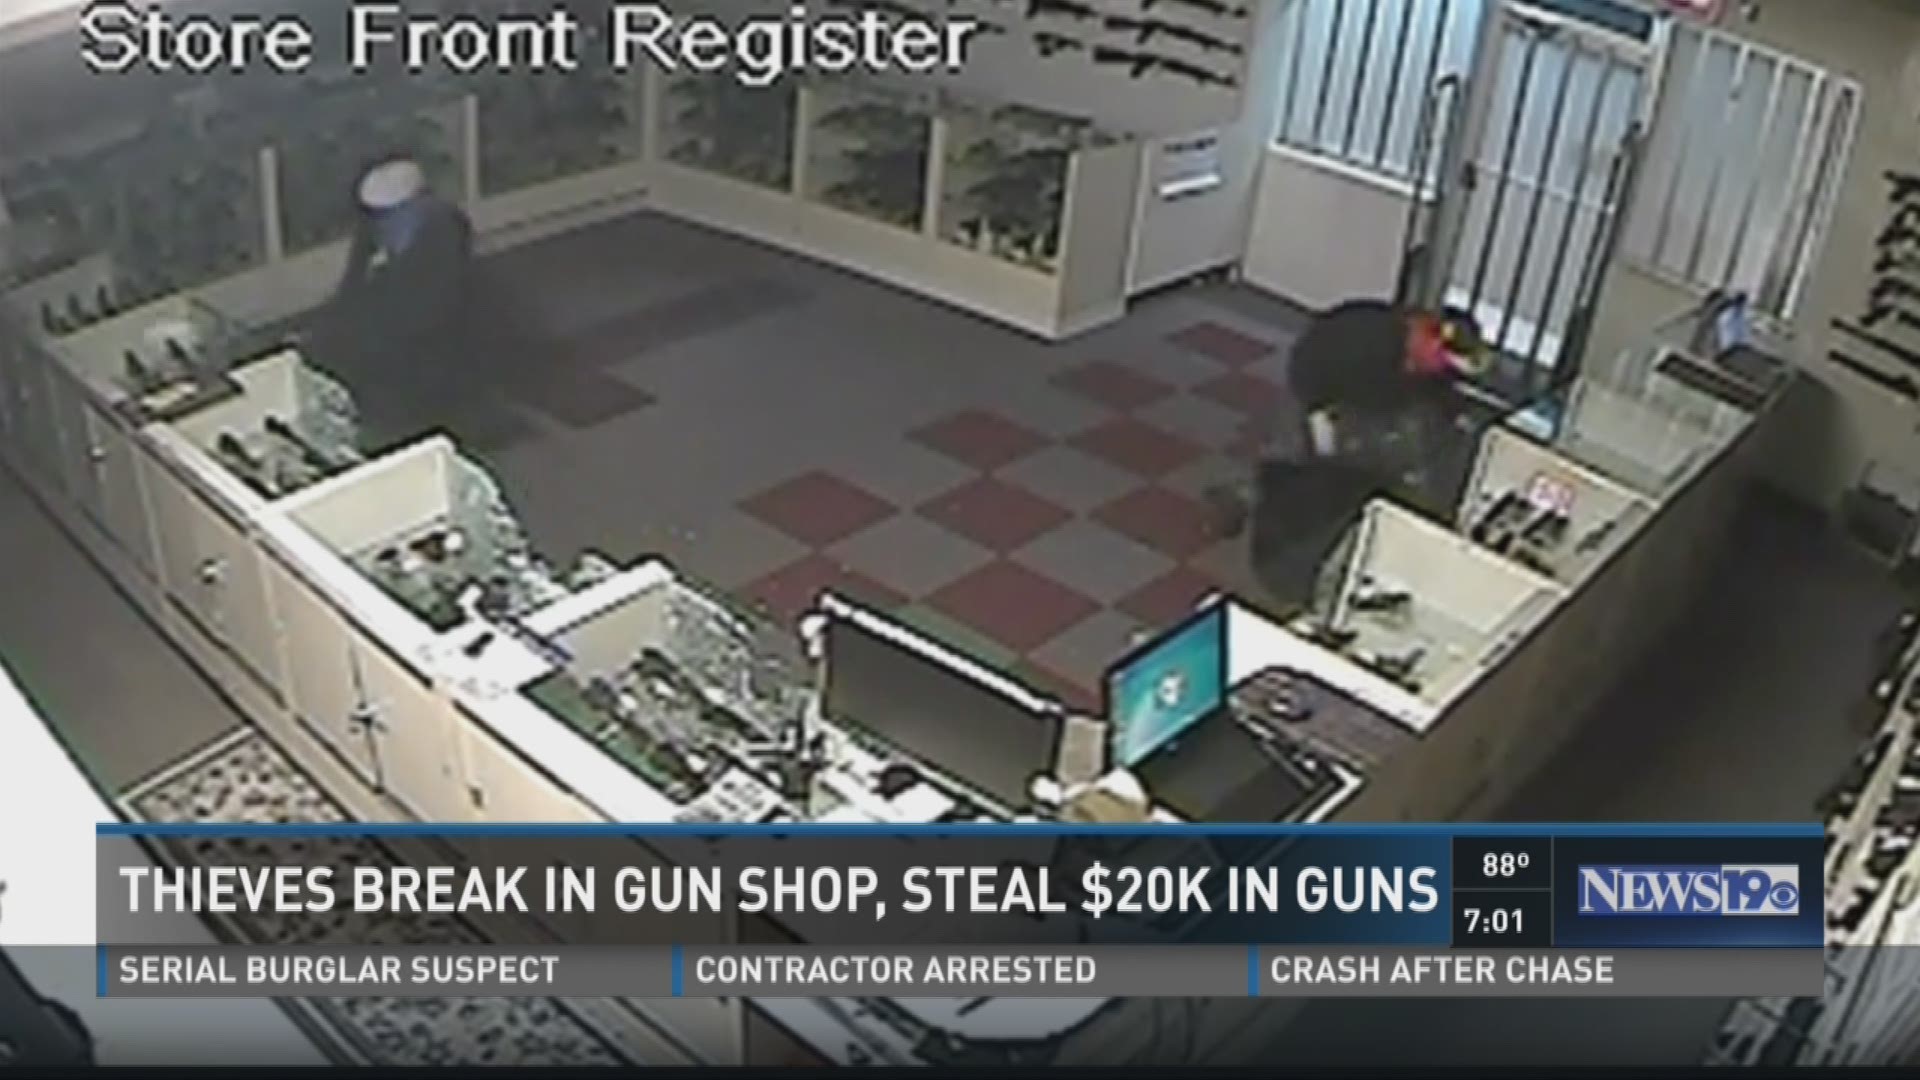 Thieves break into gun shop in Sumter and steal $20K worth of guns 